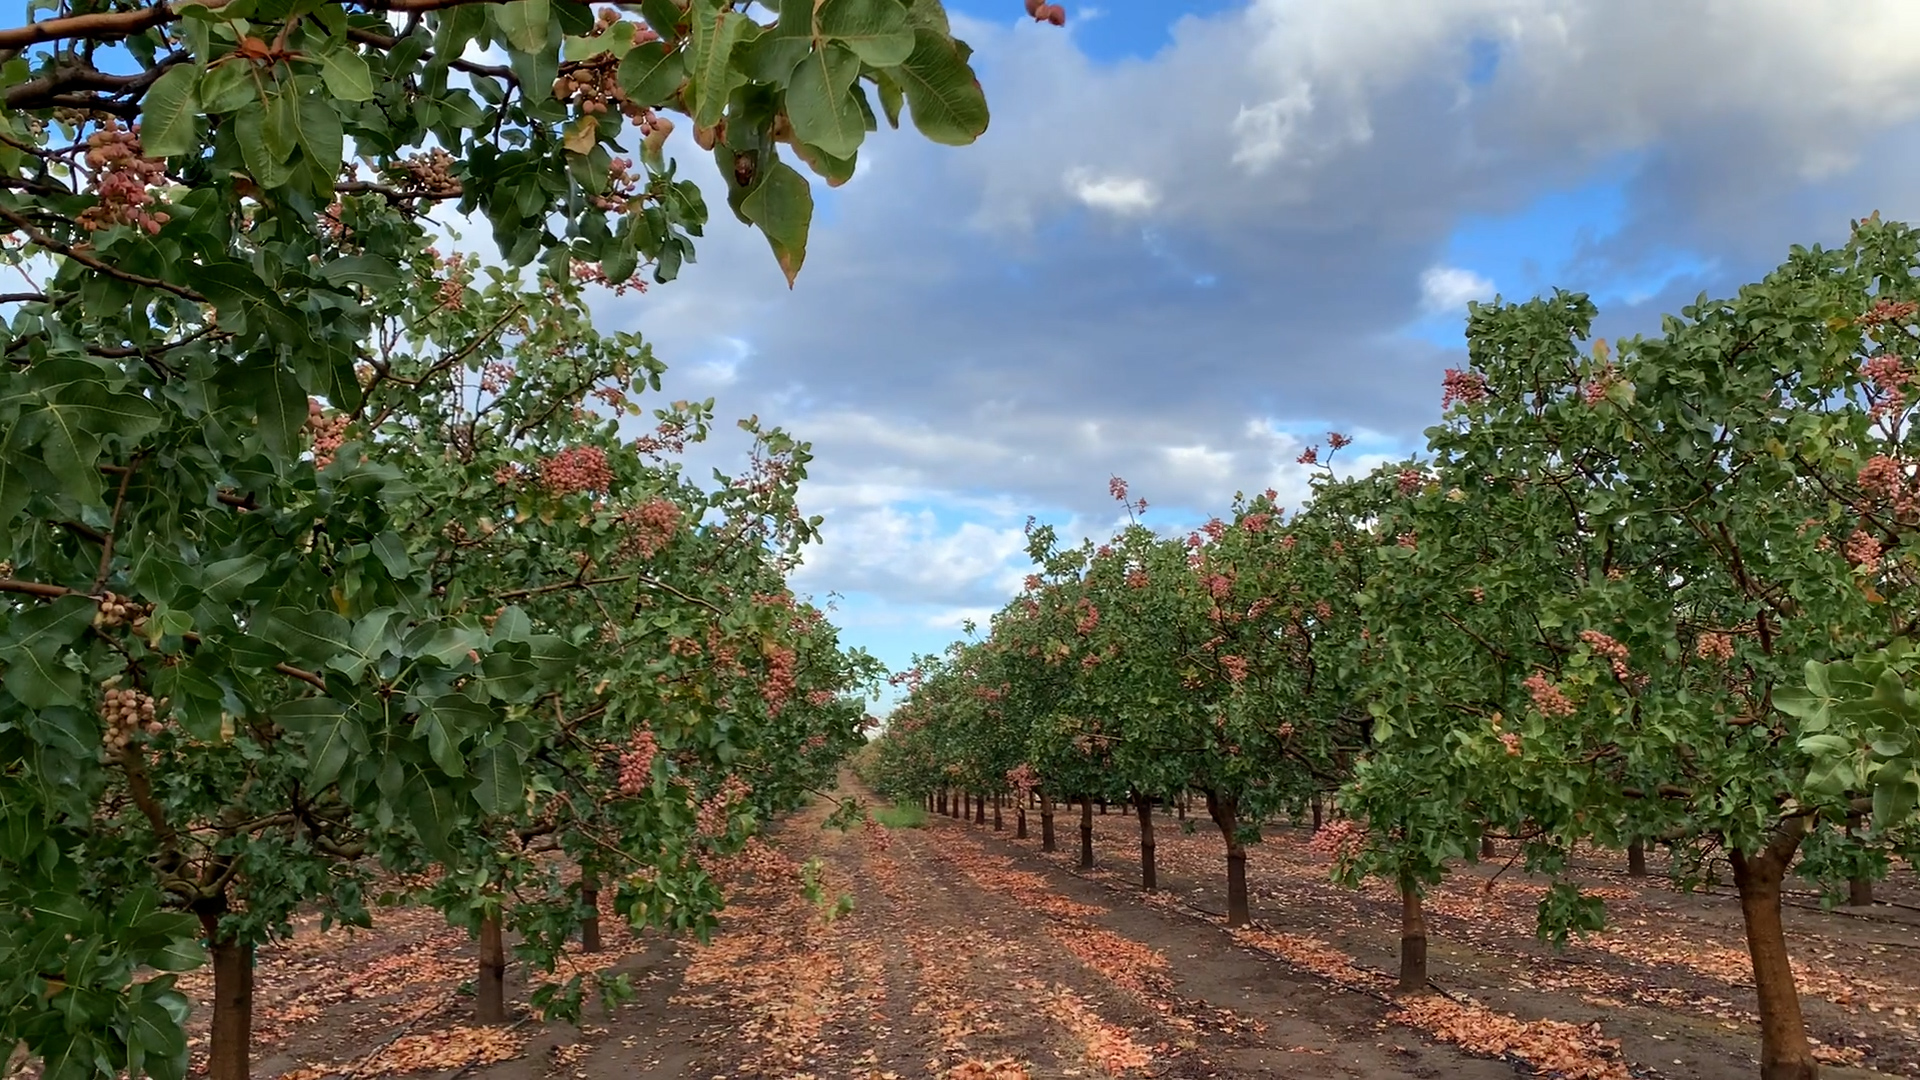 A pistachio orchard at The Specialty Crop Company in Madera, CA